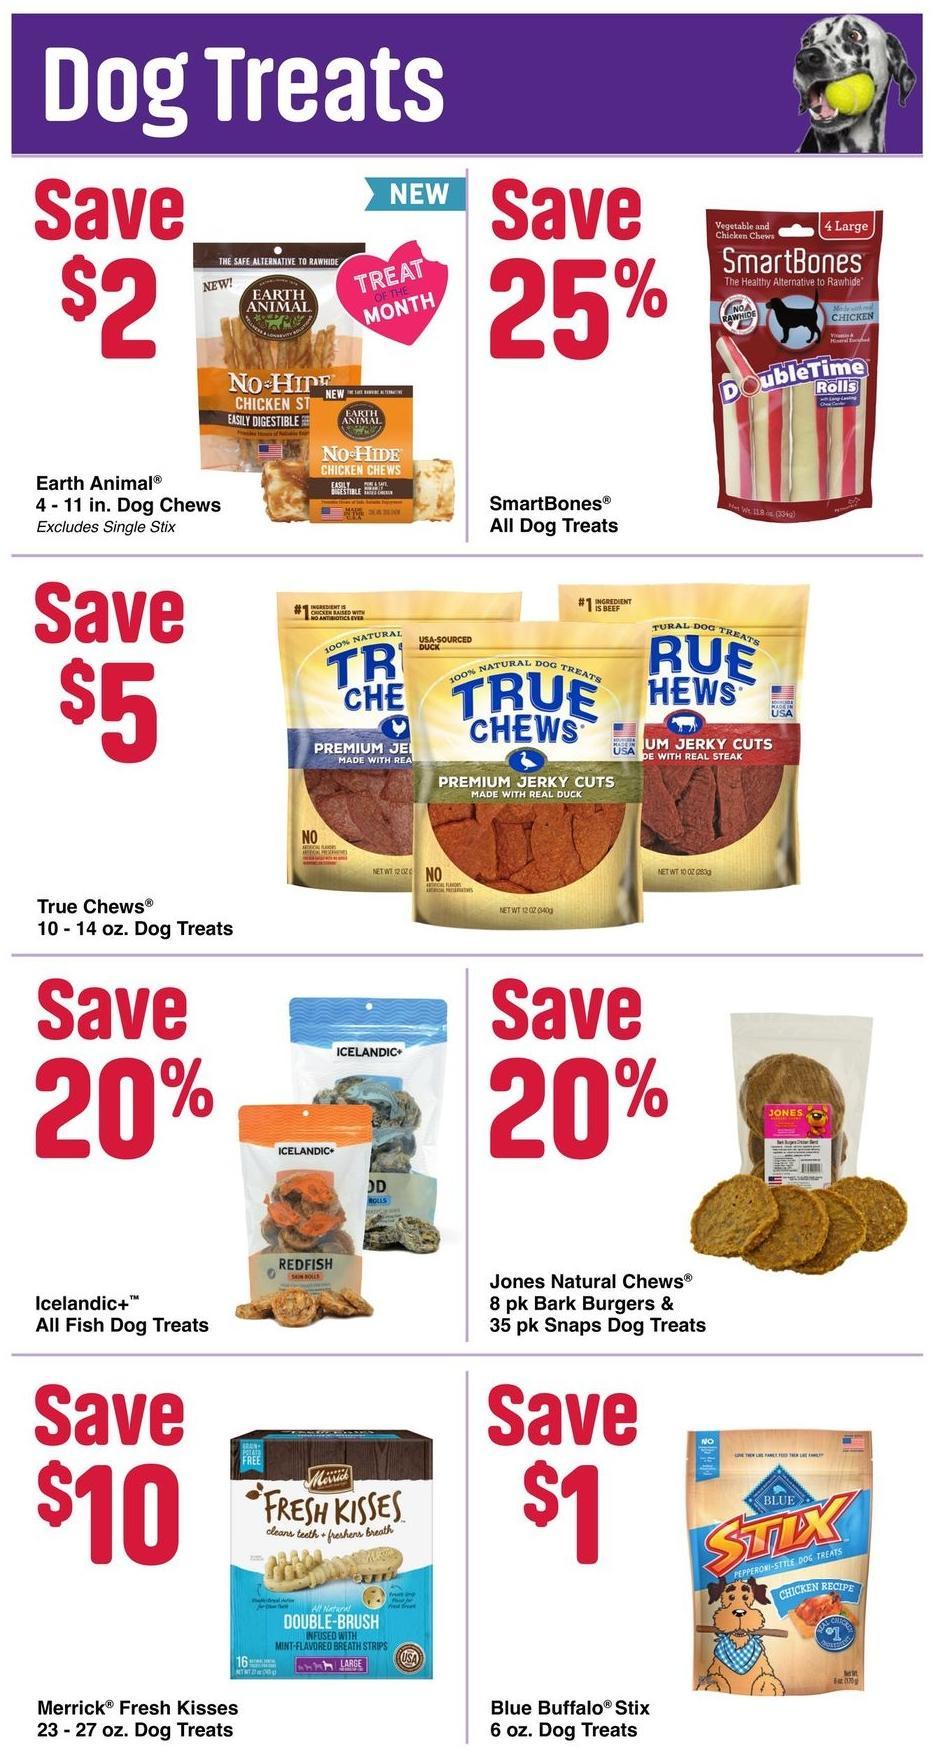 Pet Supermarket Weekly Ad from September 2